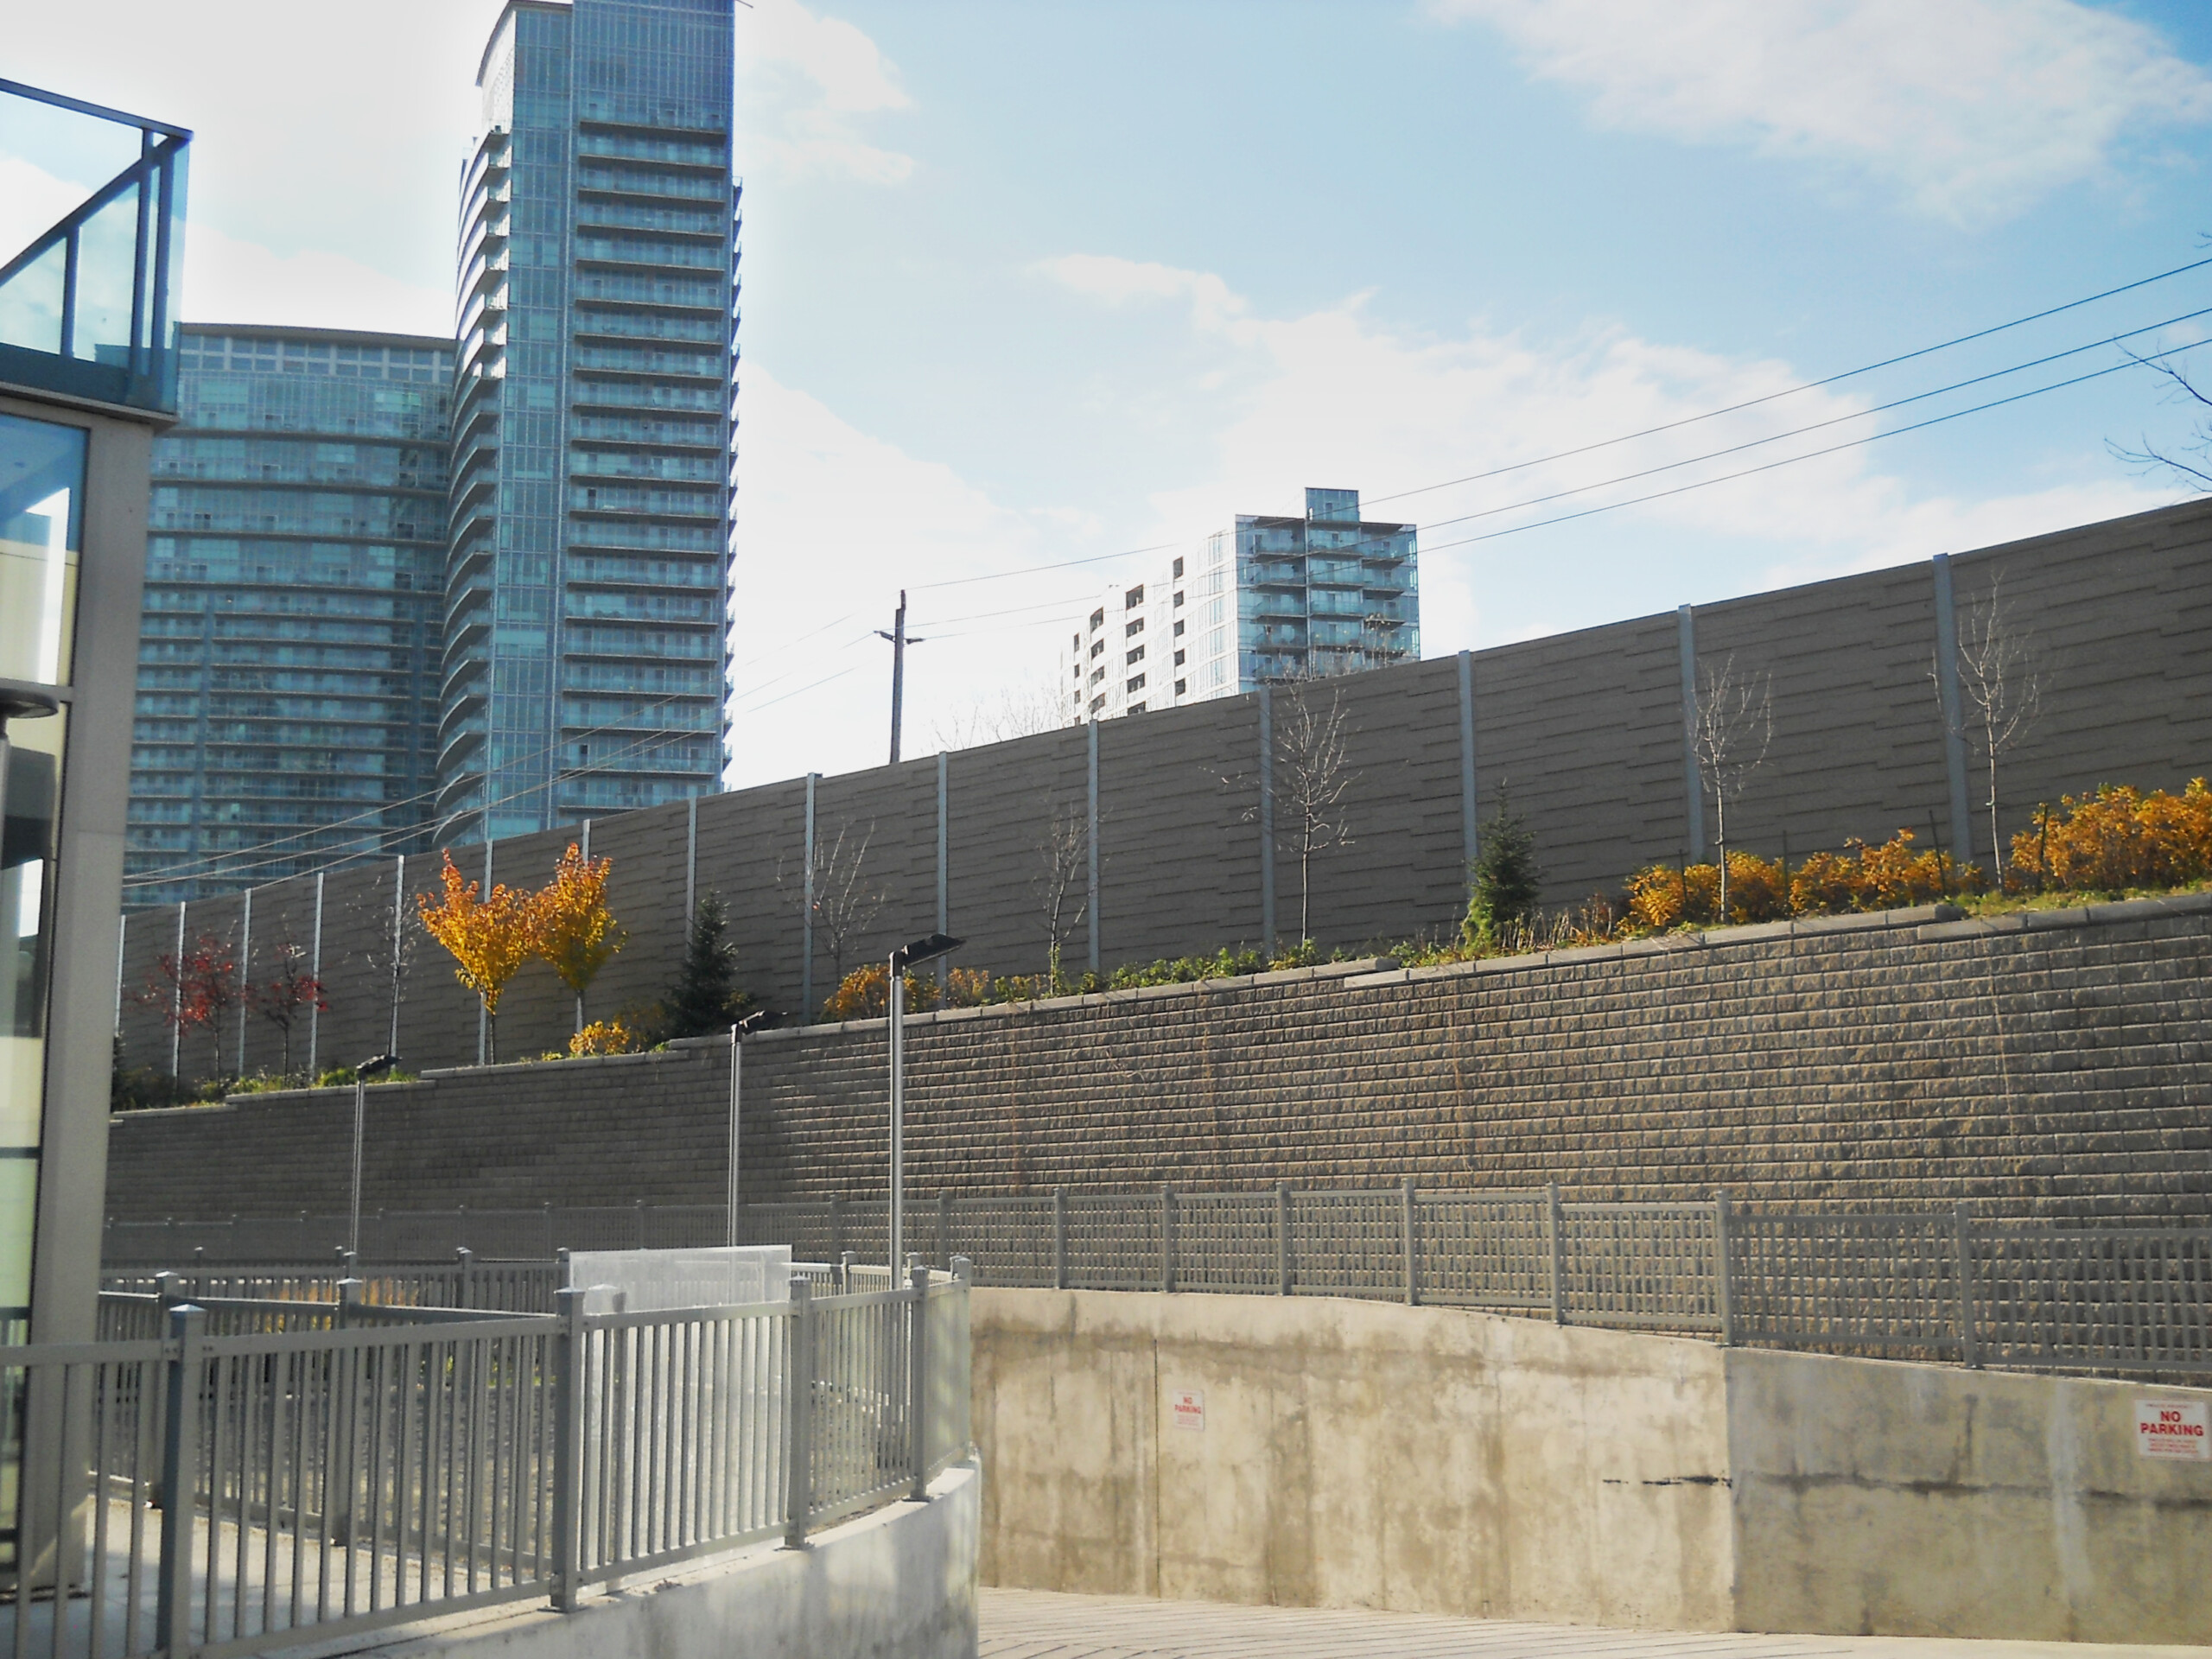 A precast absorptive noise barrier along the South Beach Condos in Etobicoke, ON.